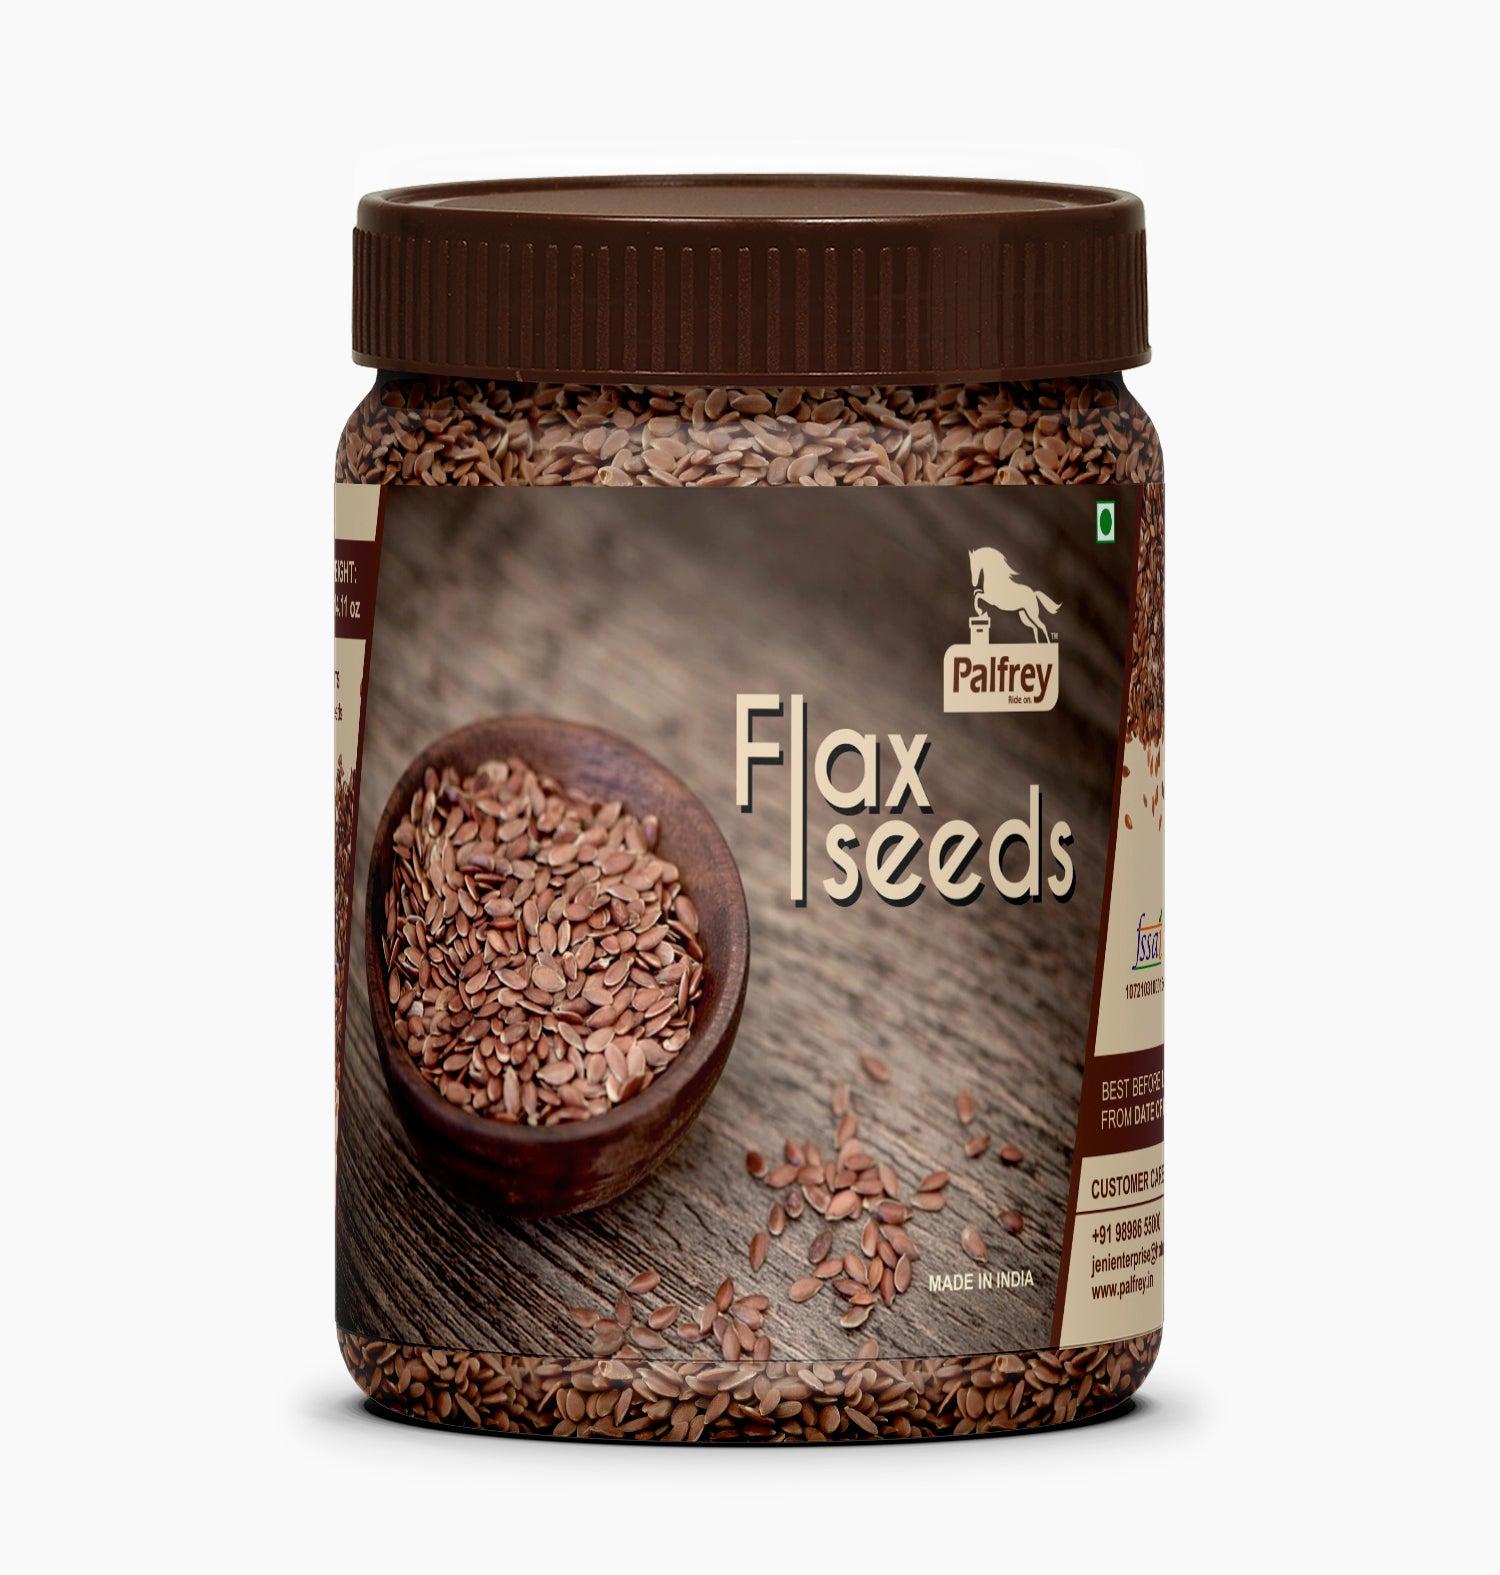 Palfrey Flax Seed for Weight Loss (400 g)